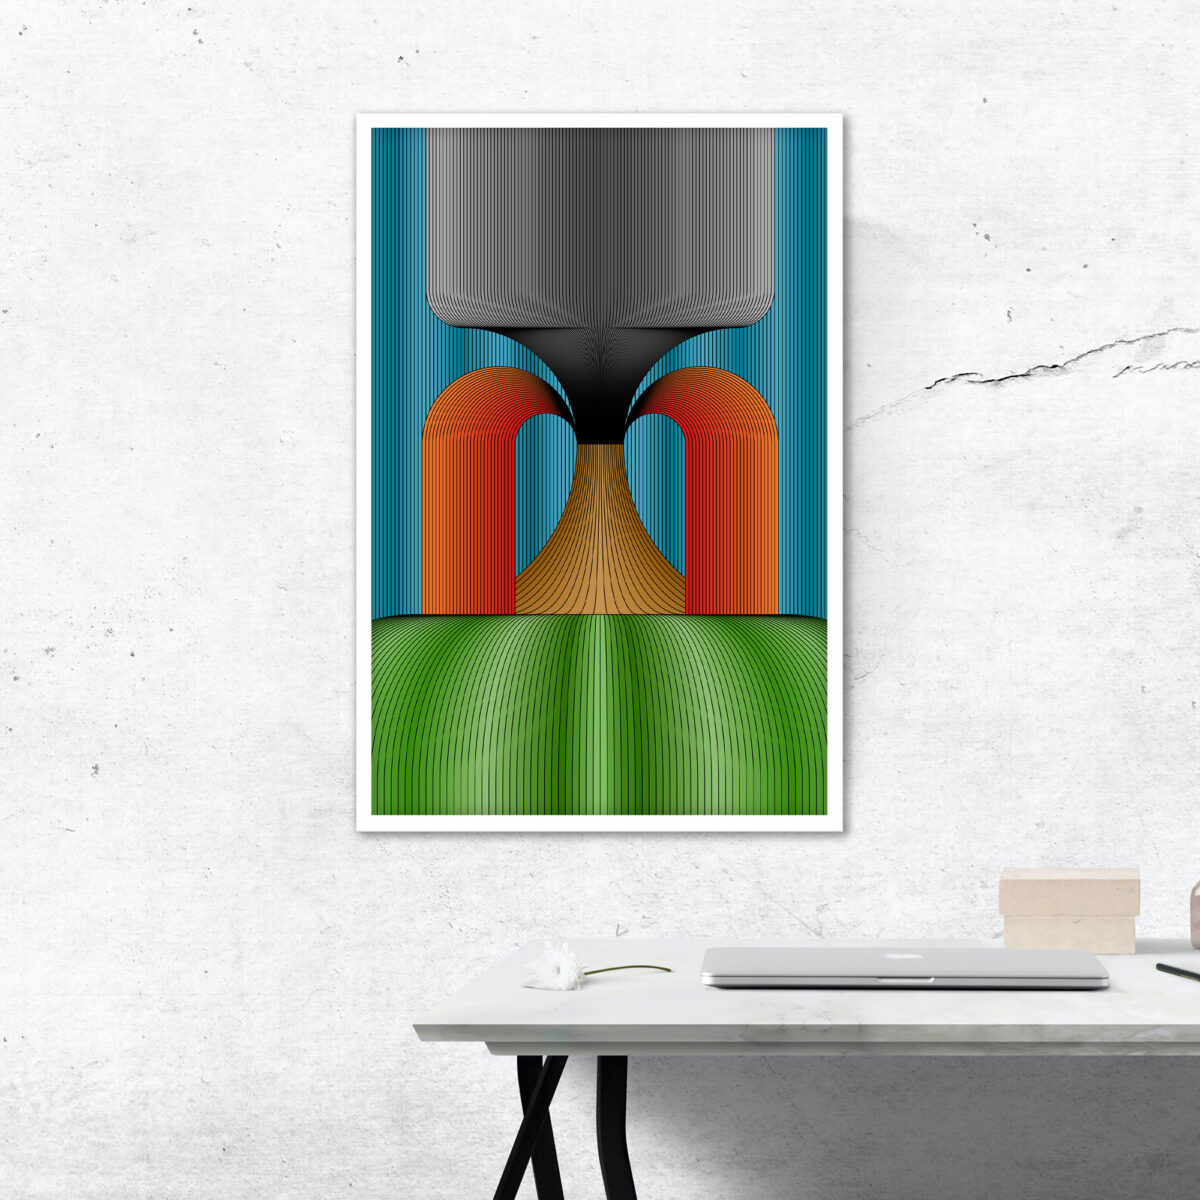 White framed Volcanic art print hanging on a wall